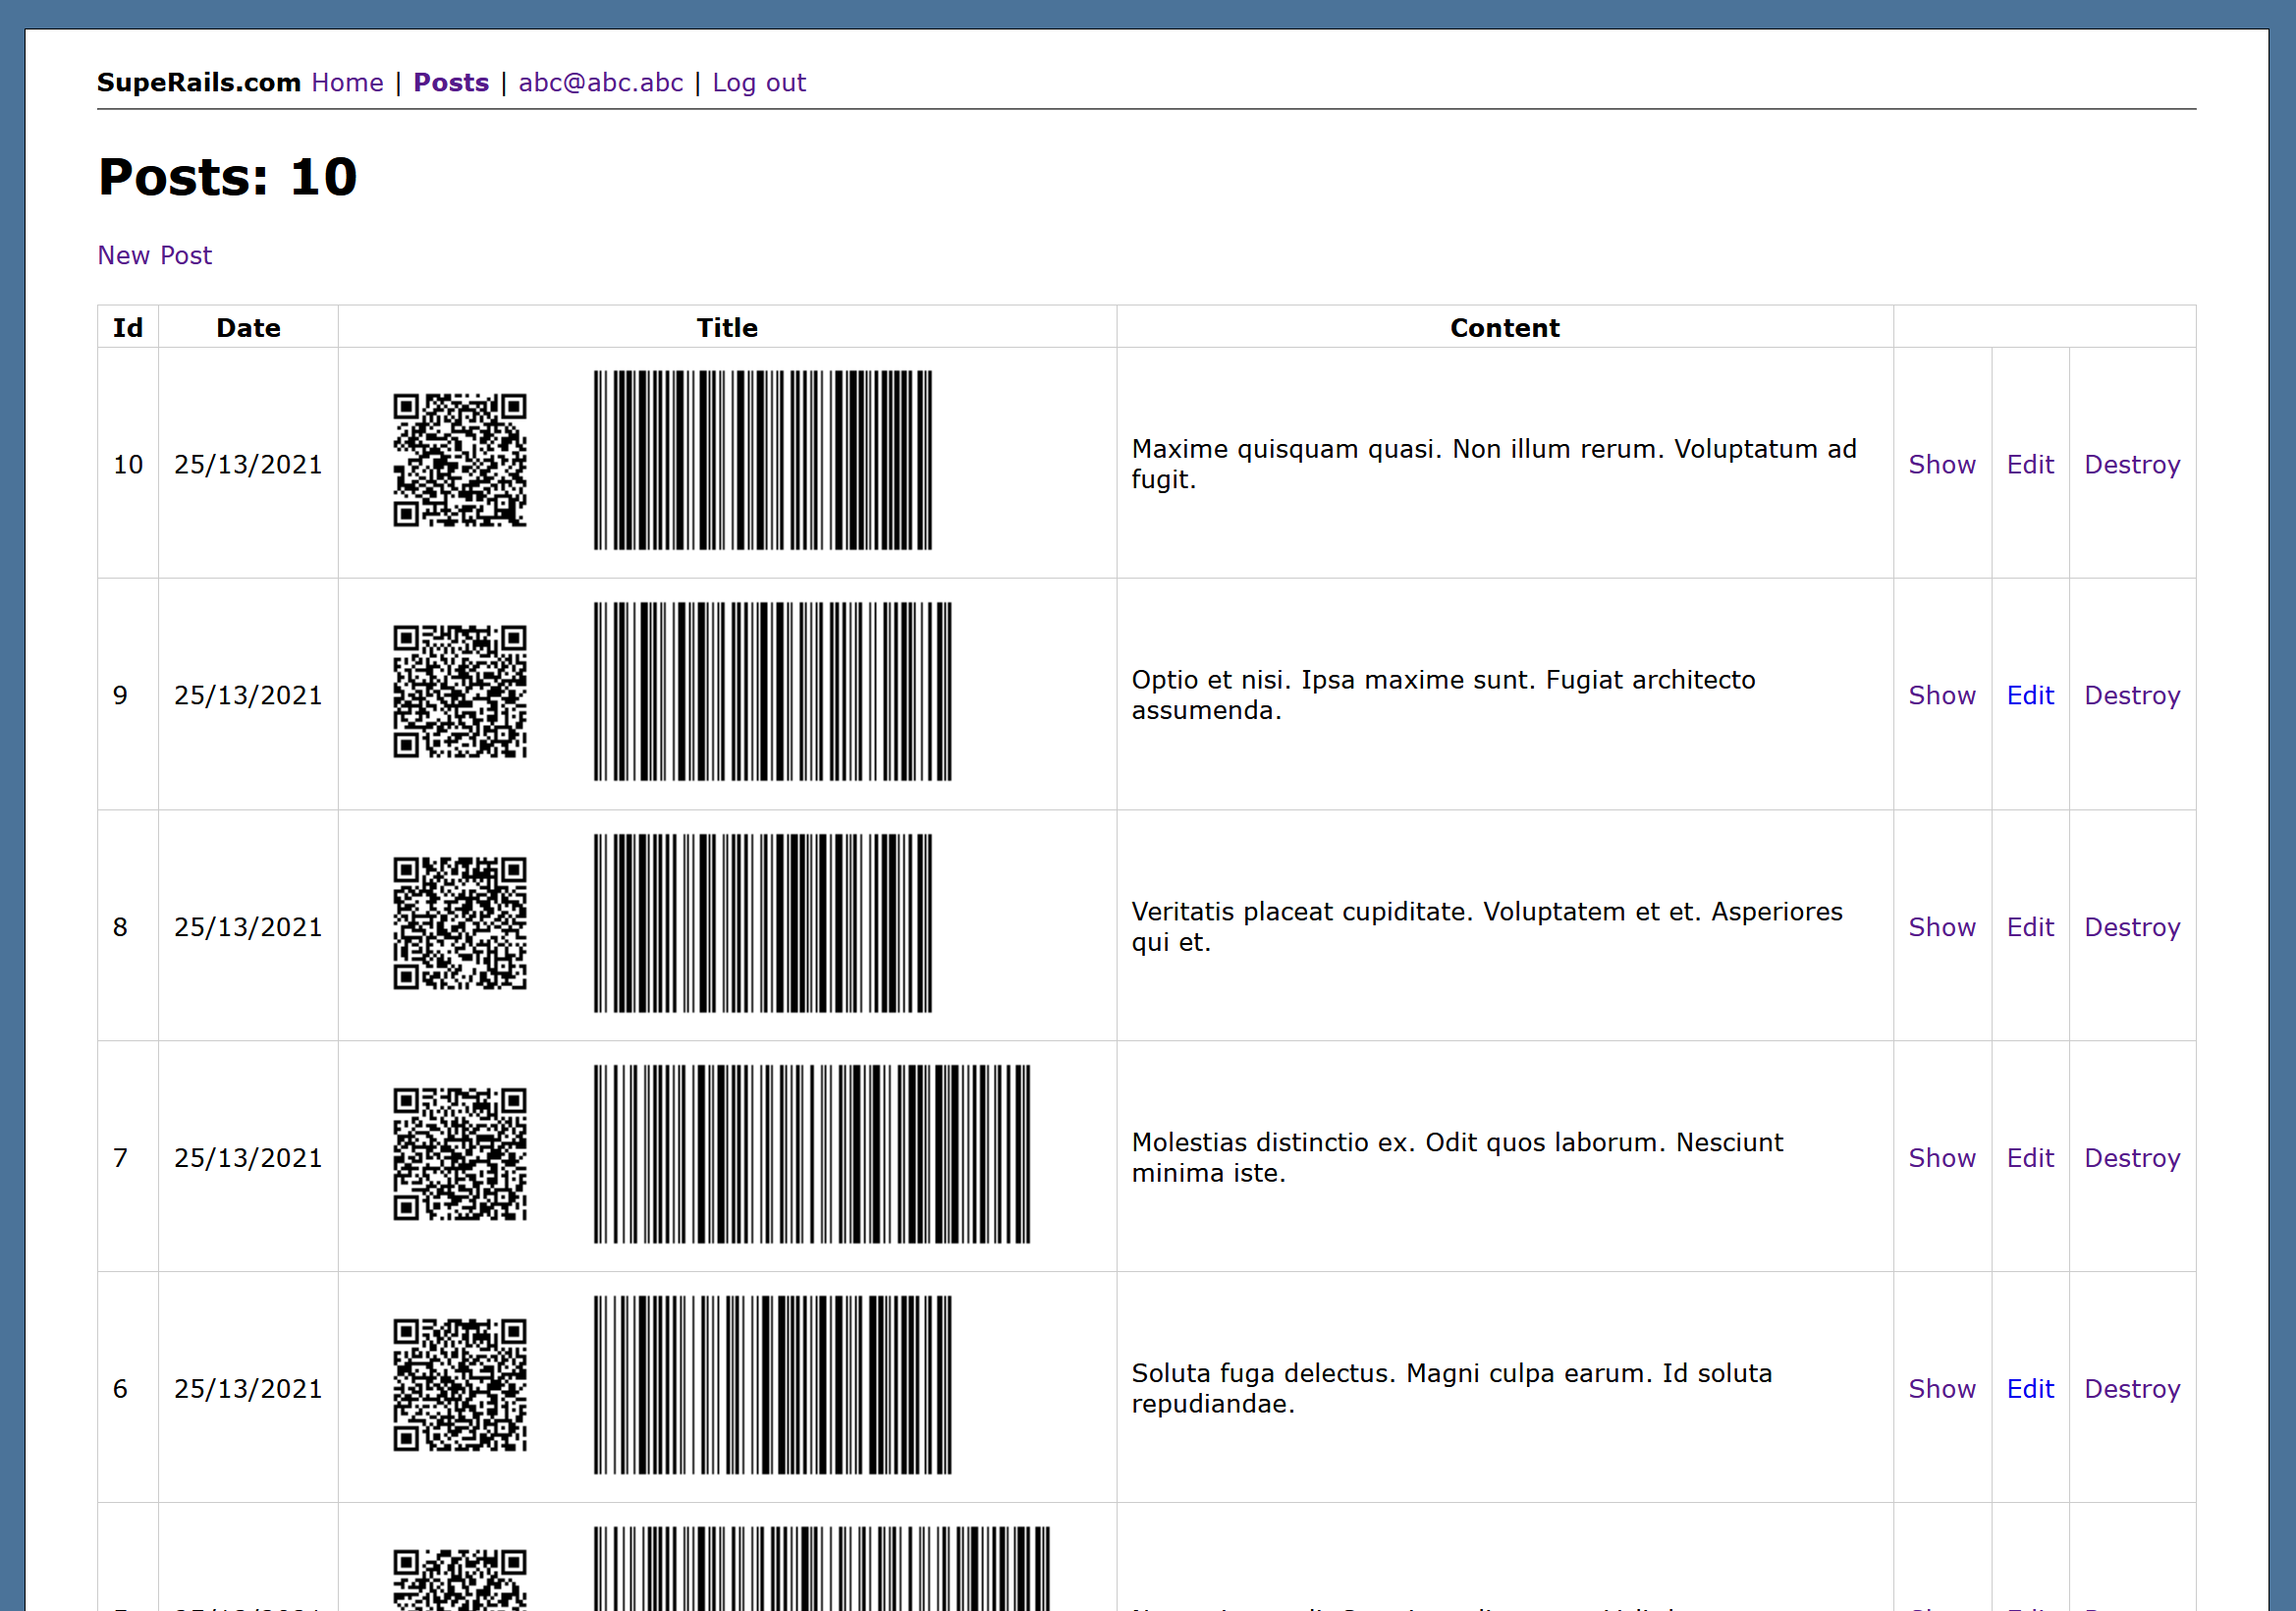 barcode and qr in a rails app